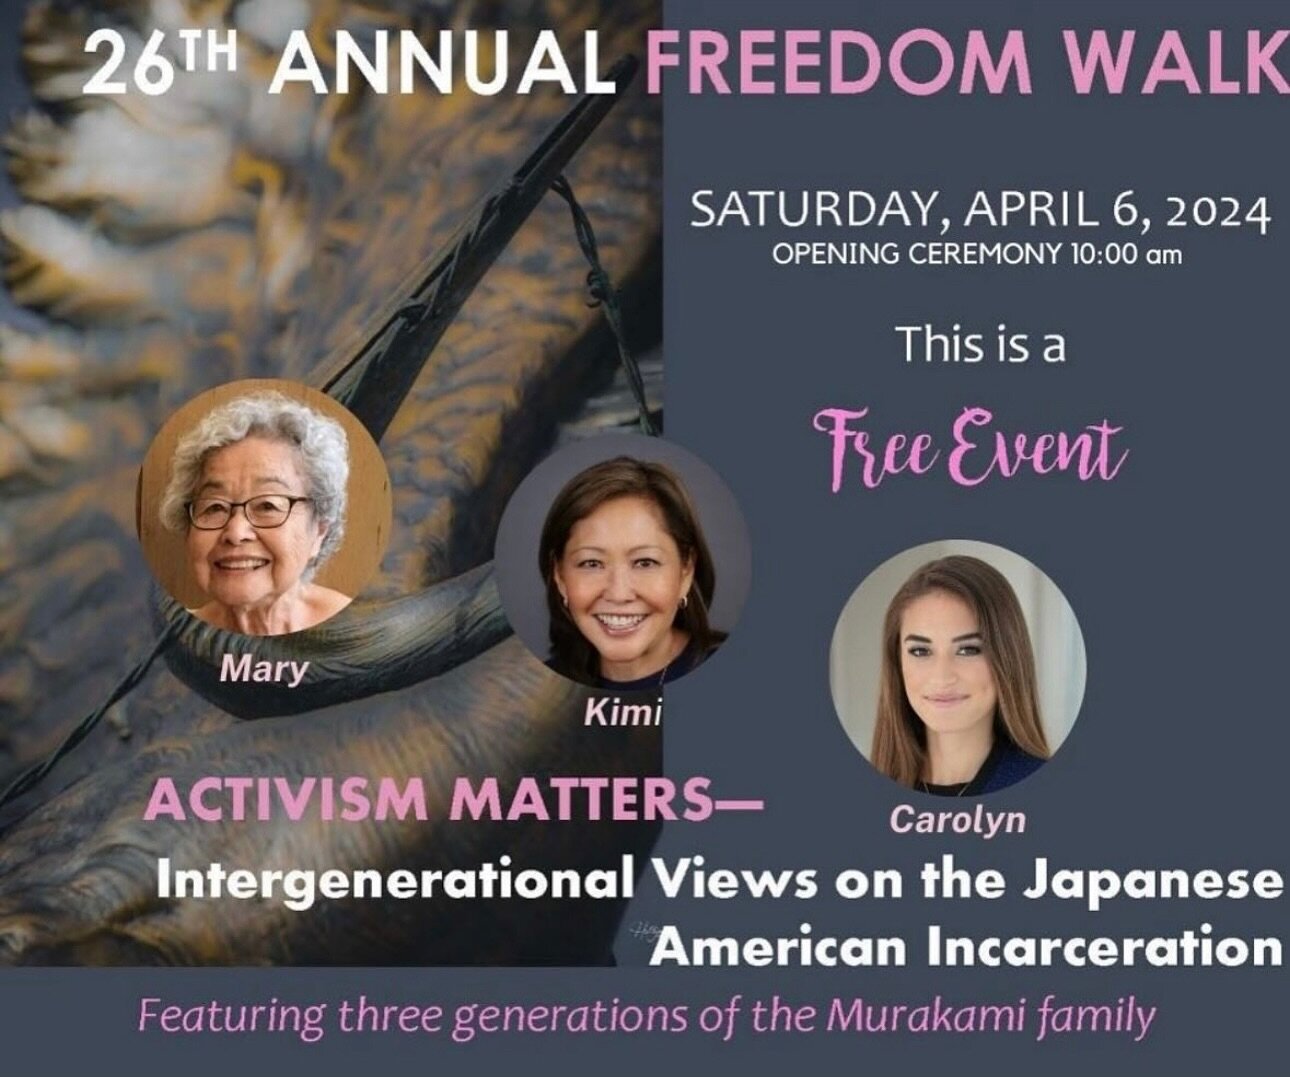 TOMORROW AT 10:00AM! JOIN US FOR THE 26TH ANNUAL NATIONAL CHERRY BLOSSOM FREEDOM WALK

This annual event continues to be an official event of the @cherryblossfest Cherry Blossom Festival. For more information, please click on the link in our &ldquo;E